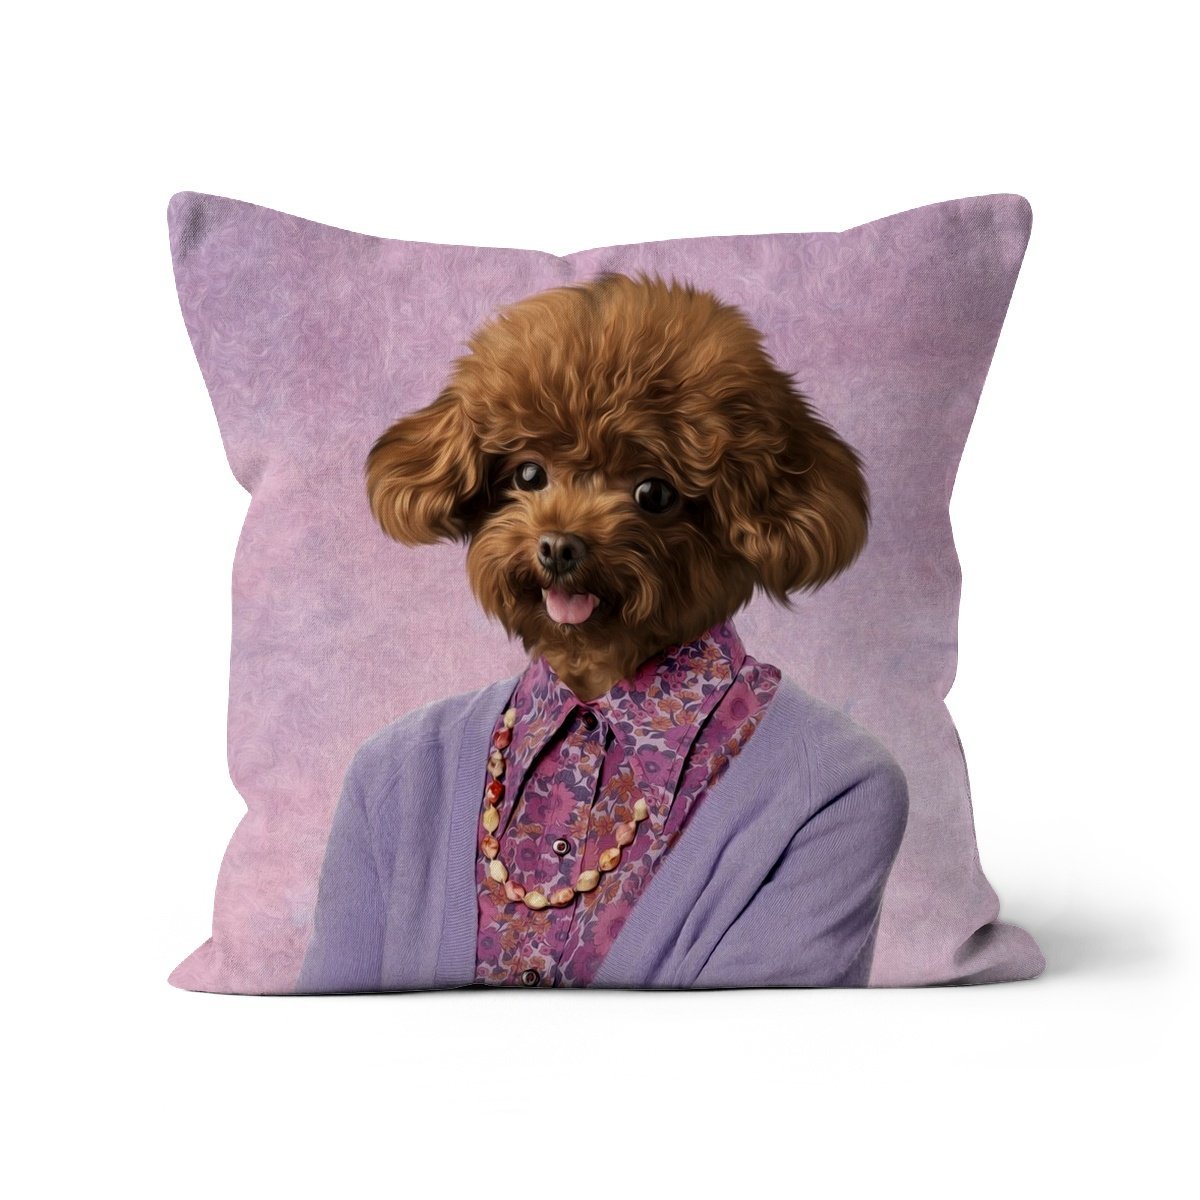 The Dot Cotton (Eastenders Inspired): Custom Pet Cushion - Paw & Glory - #pet portraits# - #dog portraits# - #pet portraits uk#paw & glory, custom pet portrait pillow,custom pillow of your pet, dog personalized pillow, custom pillow cover, dog shaped pillows, dog pillows personalized